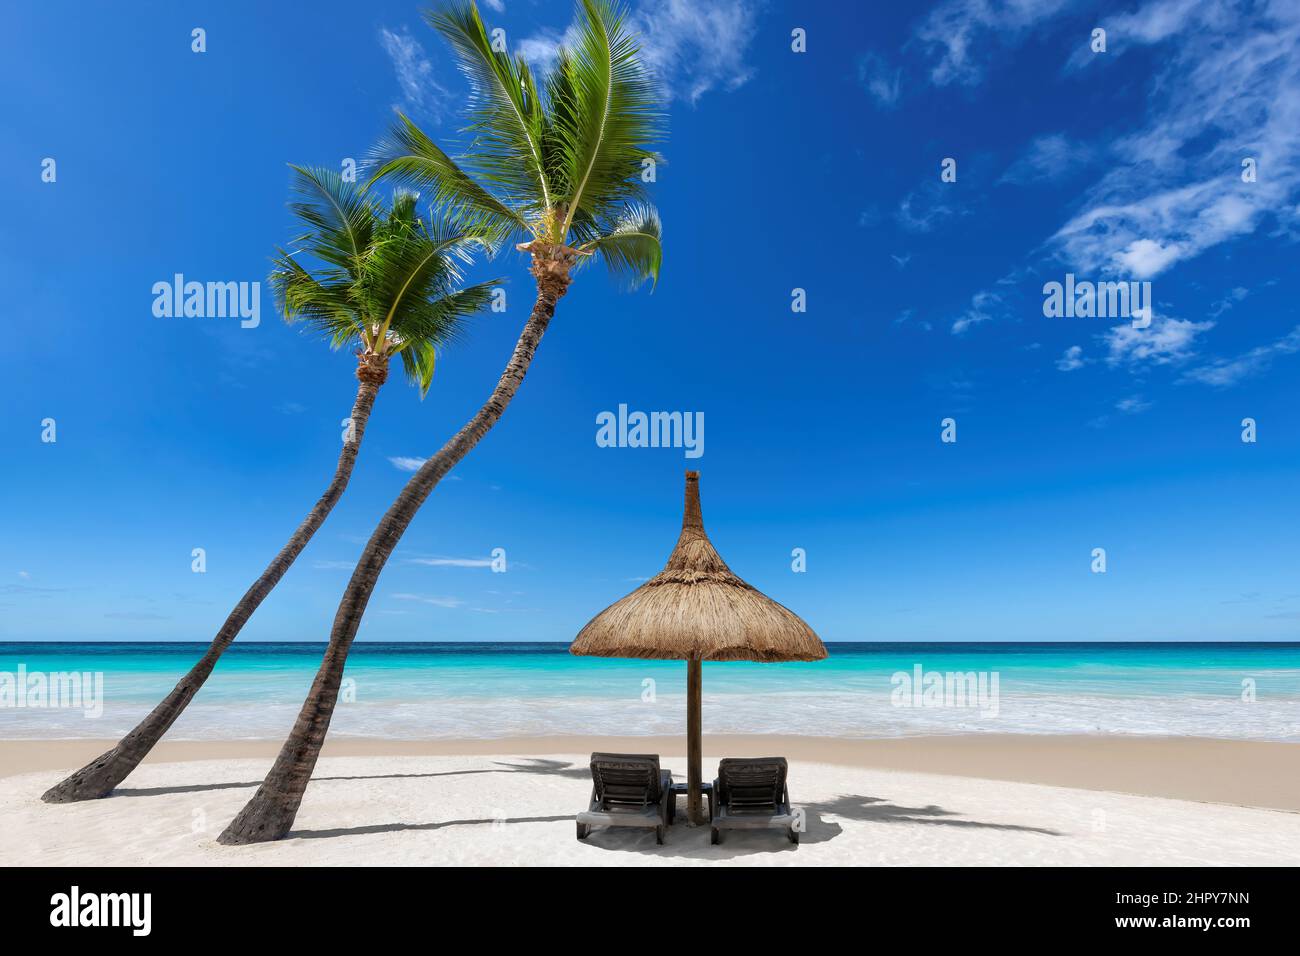 Beach umbrella and chairs on sandy beach with coco palms and turquoise sea. Stock Photo